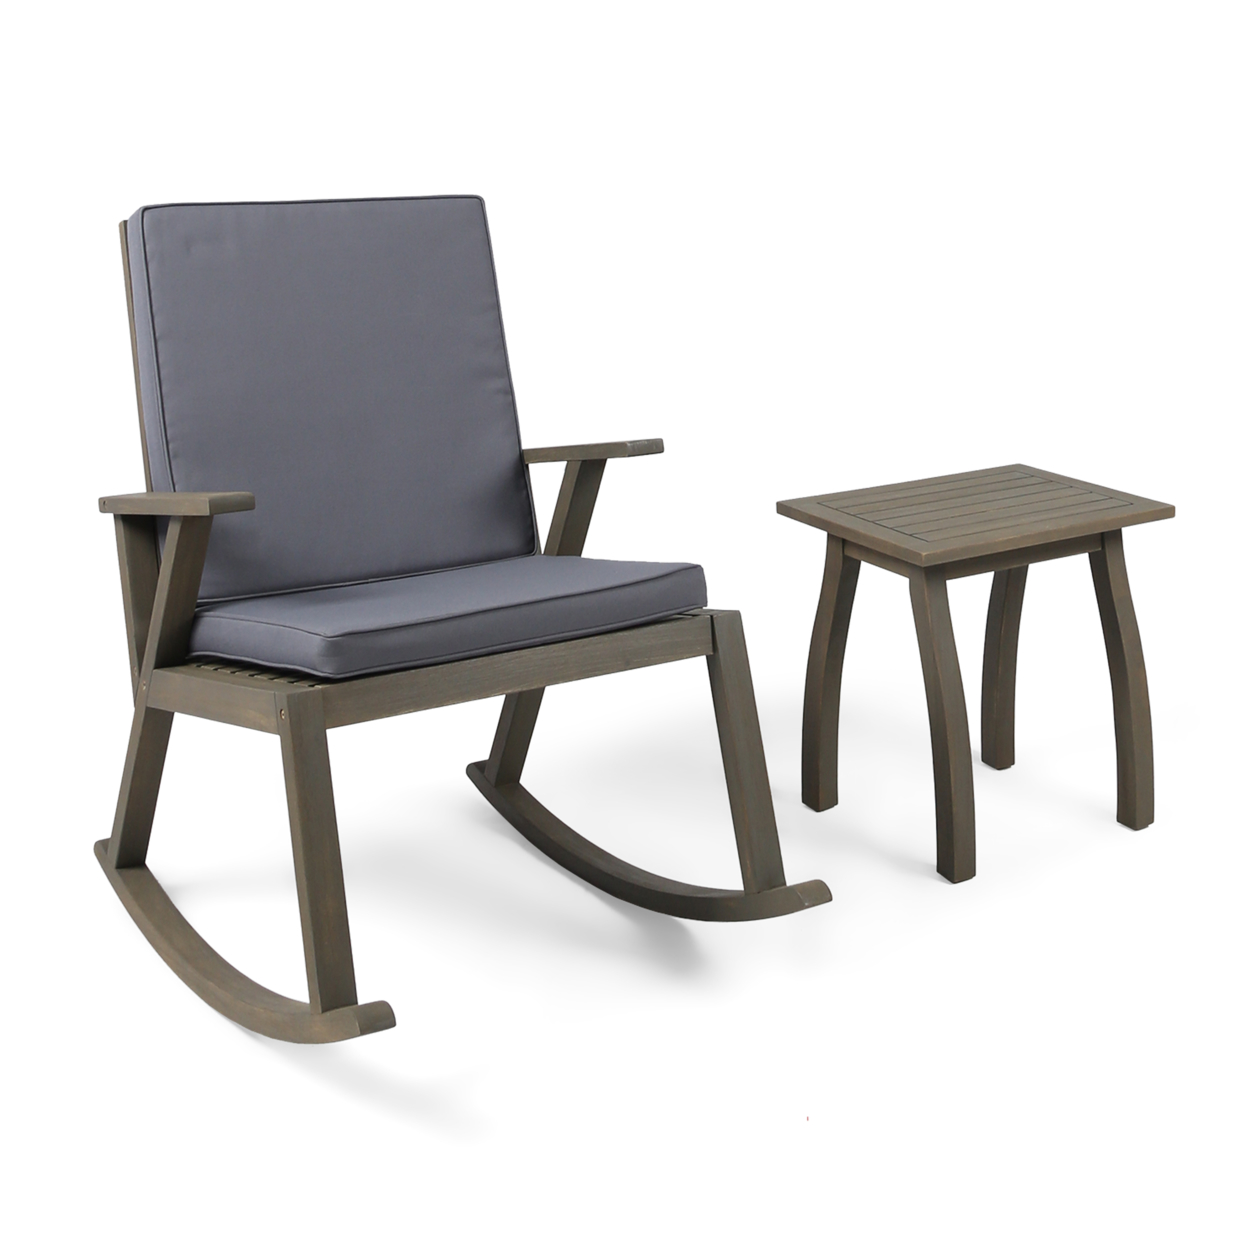 Zane Outdoor Rocking Chair With Side Table - Gray + Dark Gray, 2-Piece Set